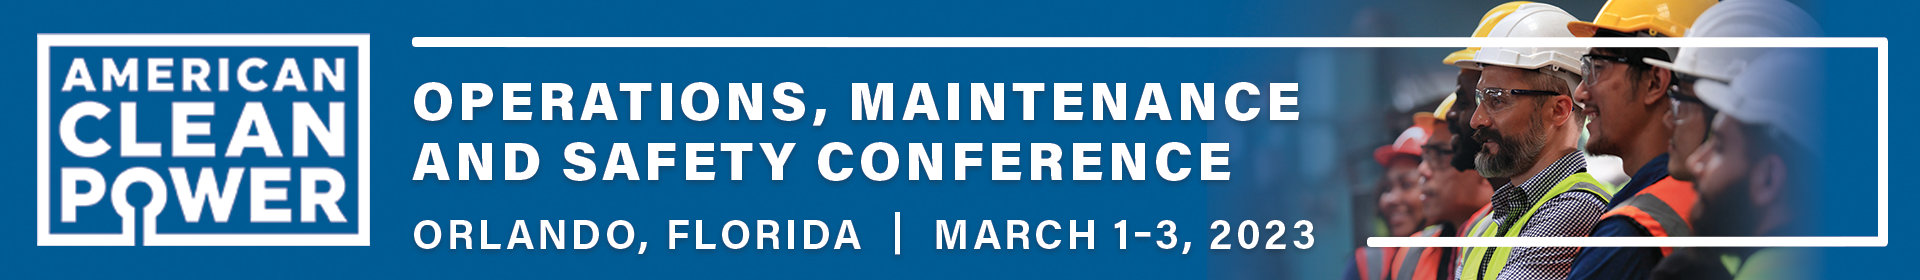 2023 Operations, Maintenance and Safety Conference Event Banner